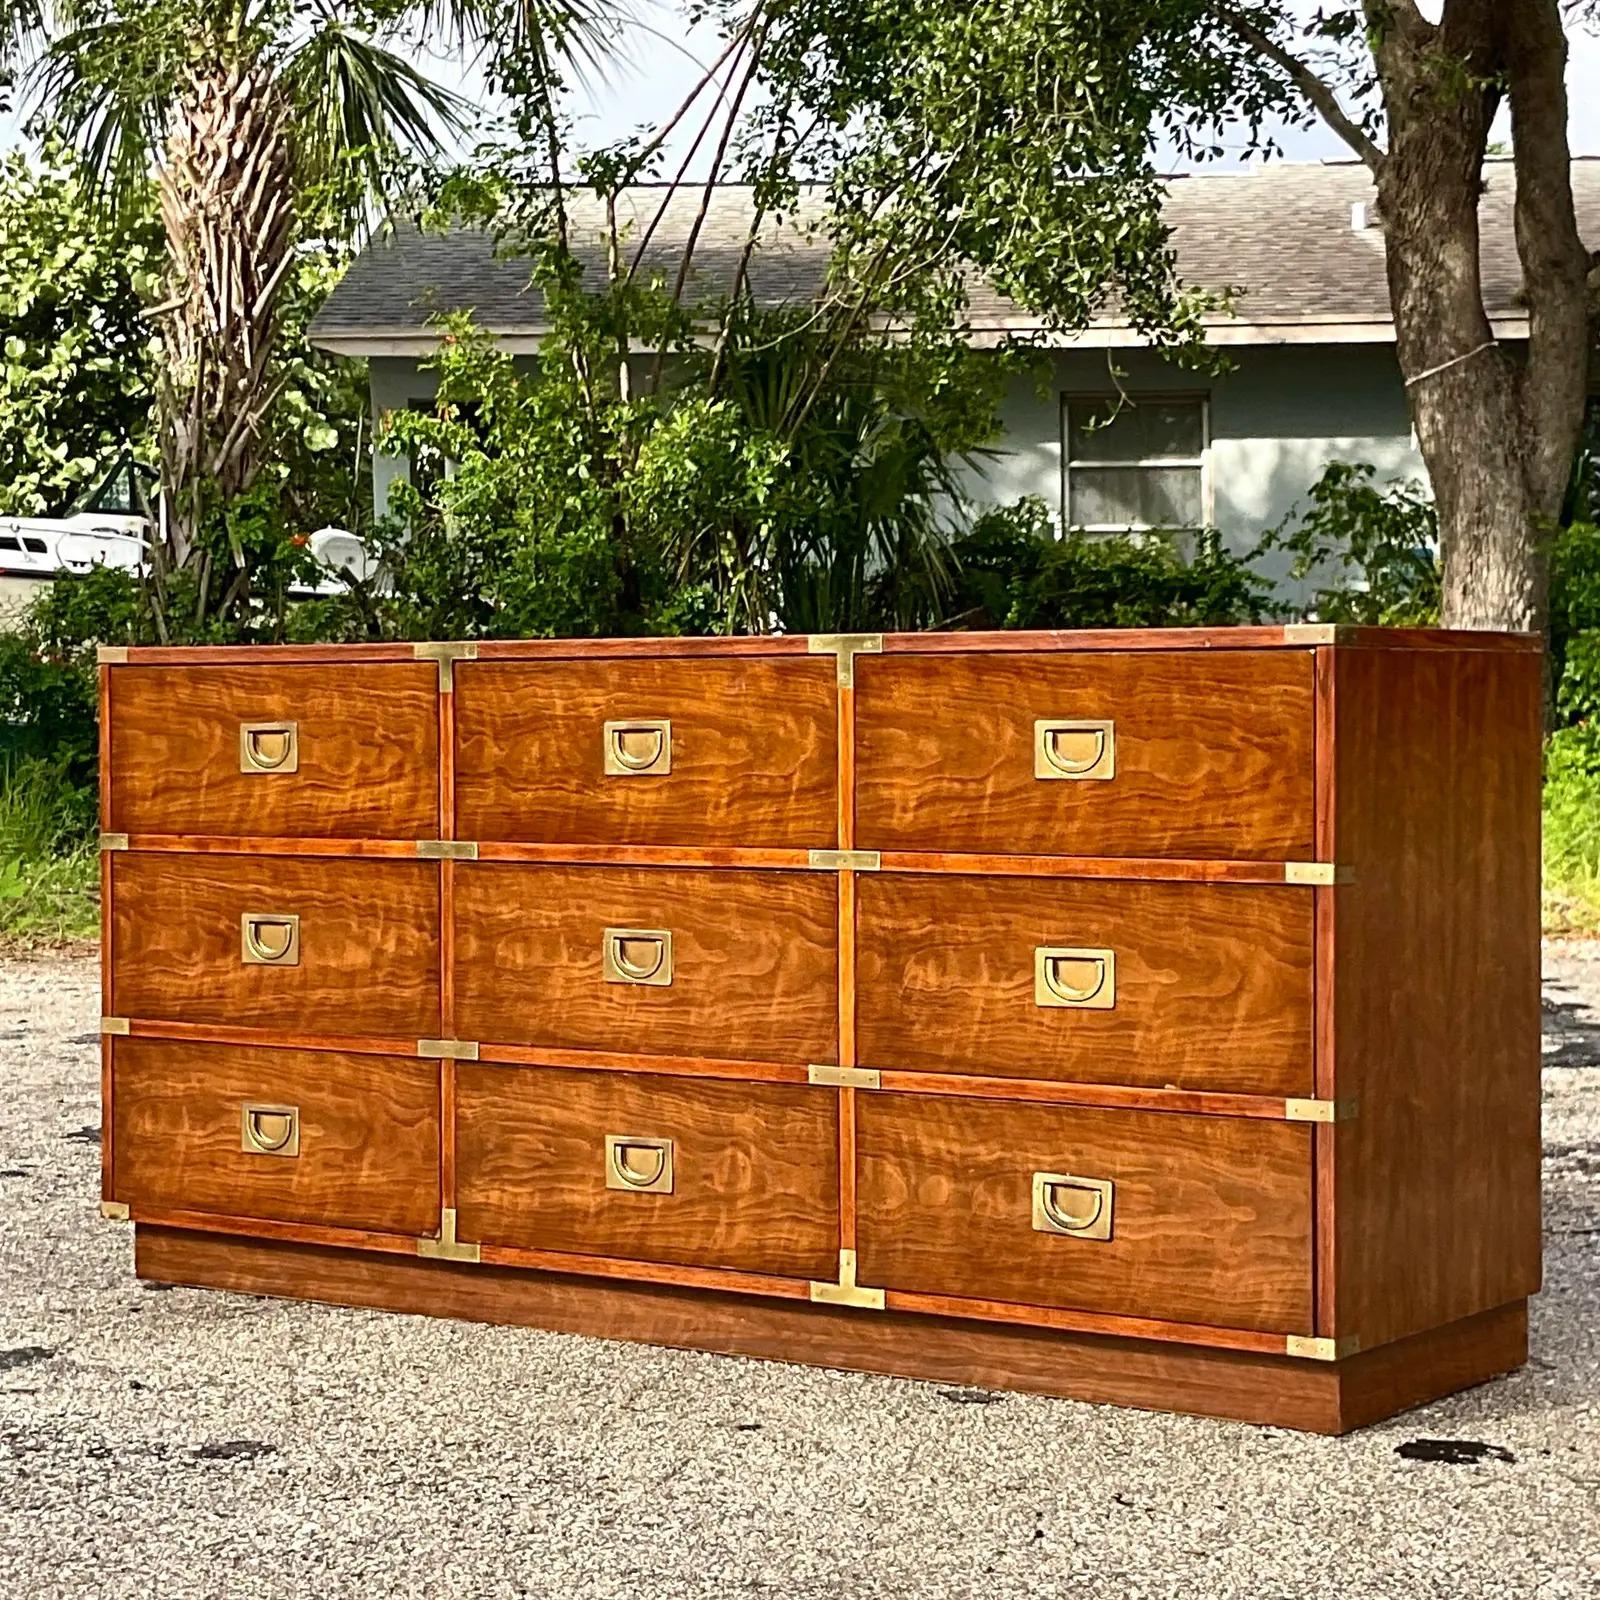 A fabulous vintage Boho Campaign dresser. Made by the iconic Drexel group. Beautiful wood grain detail and burnished brass hardware. Signed inside the drawer. Acquired from a Palm Beach estate.